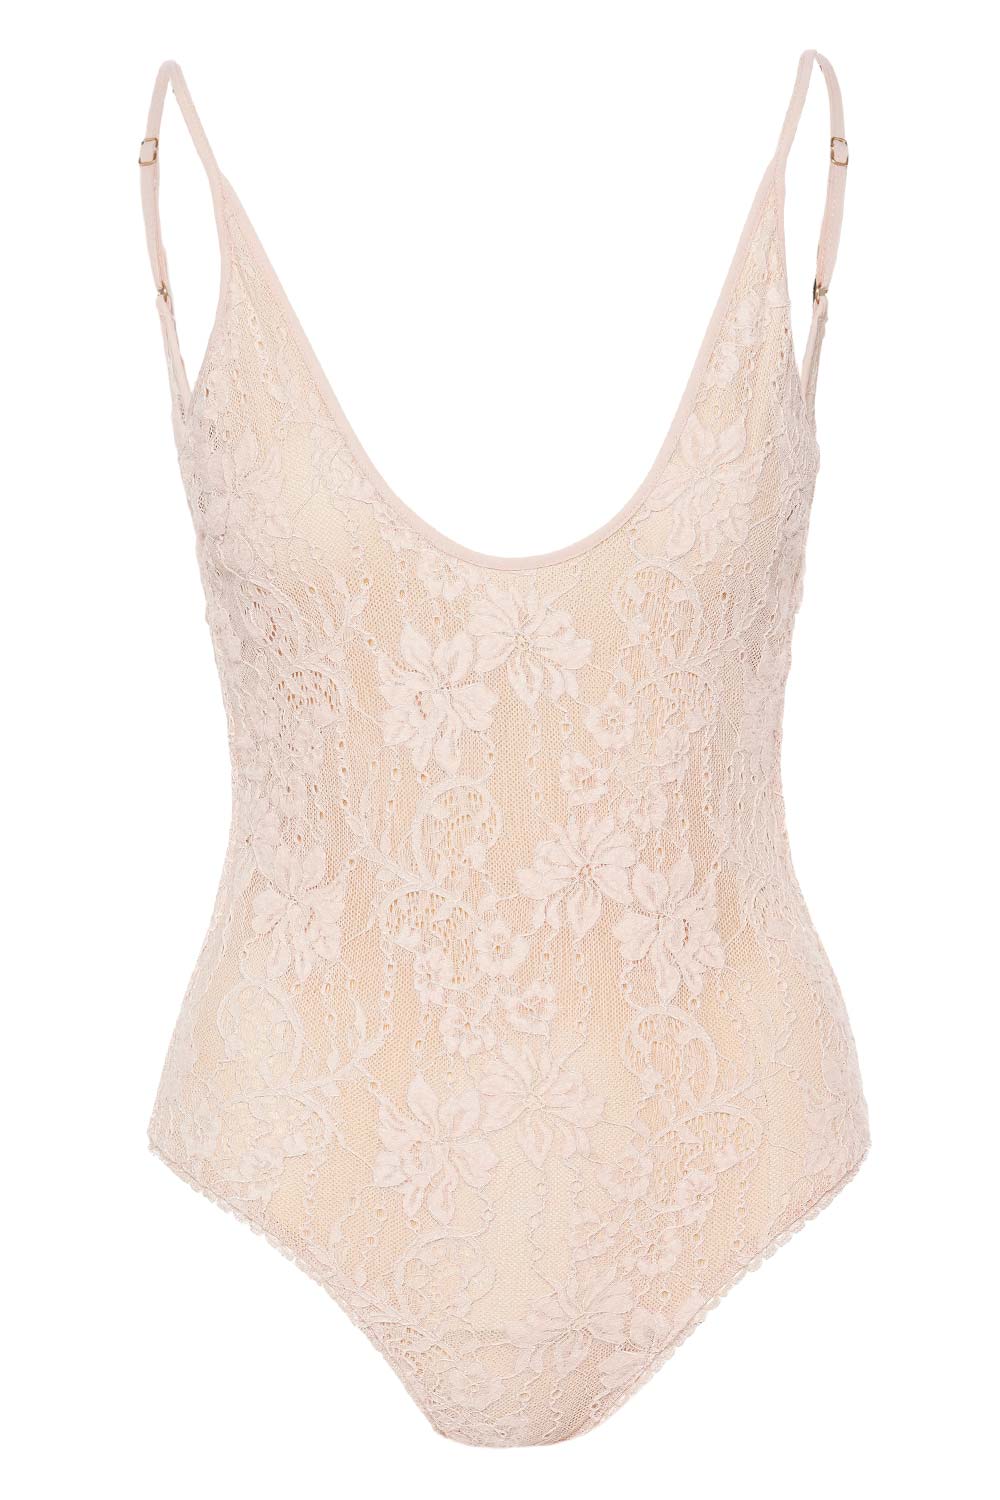 LACE BODYSUIT WITH STRAPS - Beige-pink